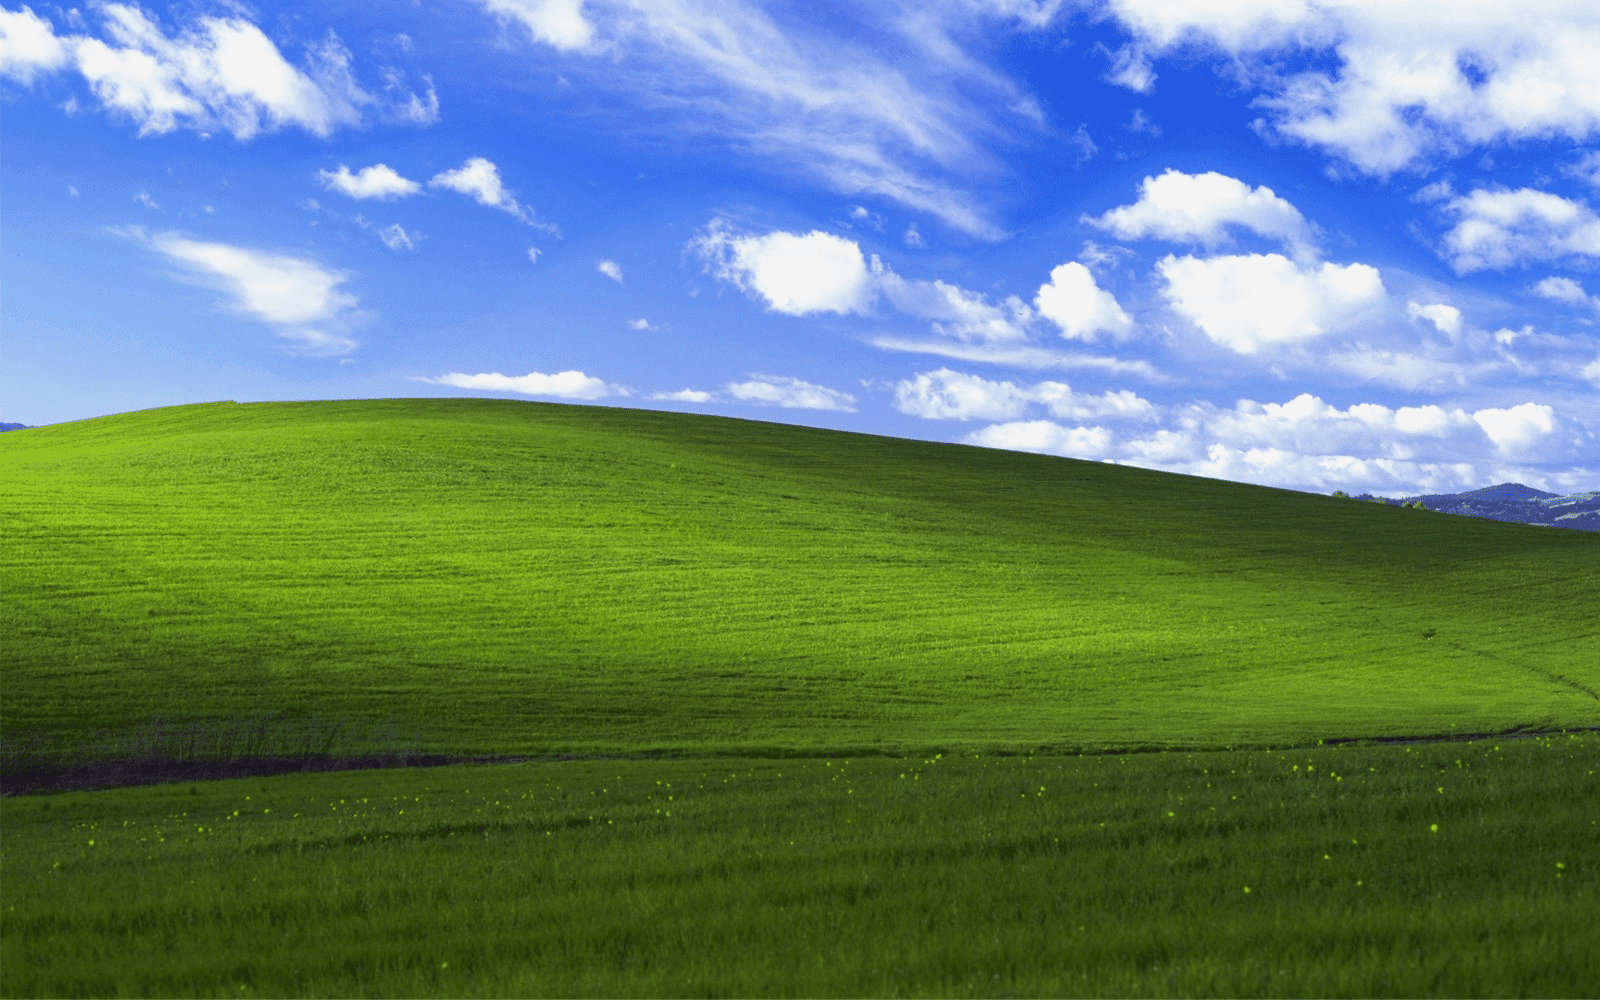 The iconic Windows XP green grass background image.